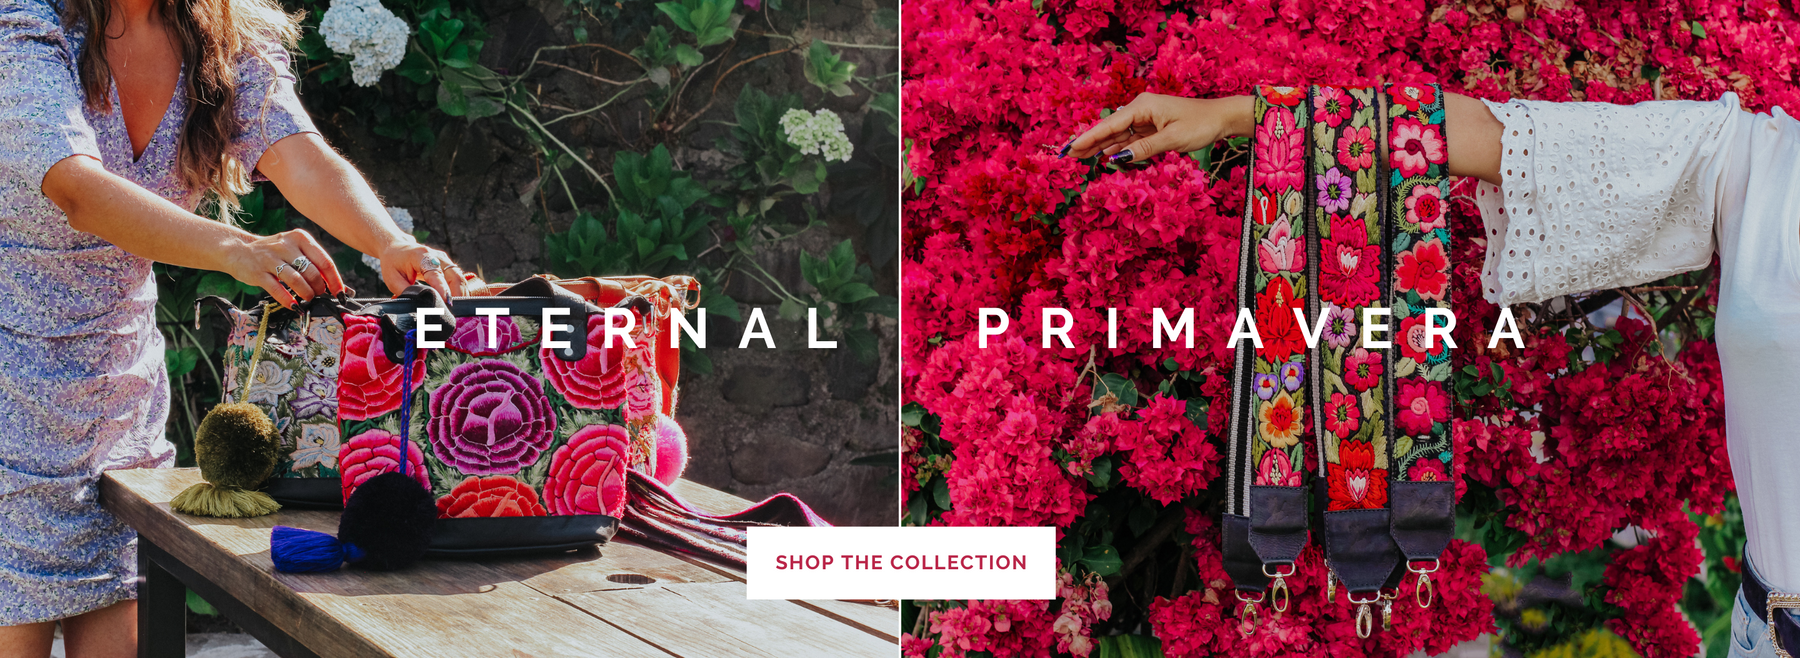 Hiptipico products inspired by eternal primavera, florals and colours of Guatemala. ethically made luxury leather bags, straps for bags, cameras hand-made in Guatemala